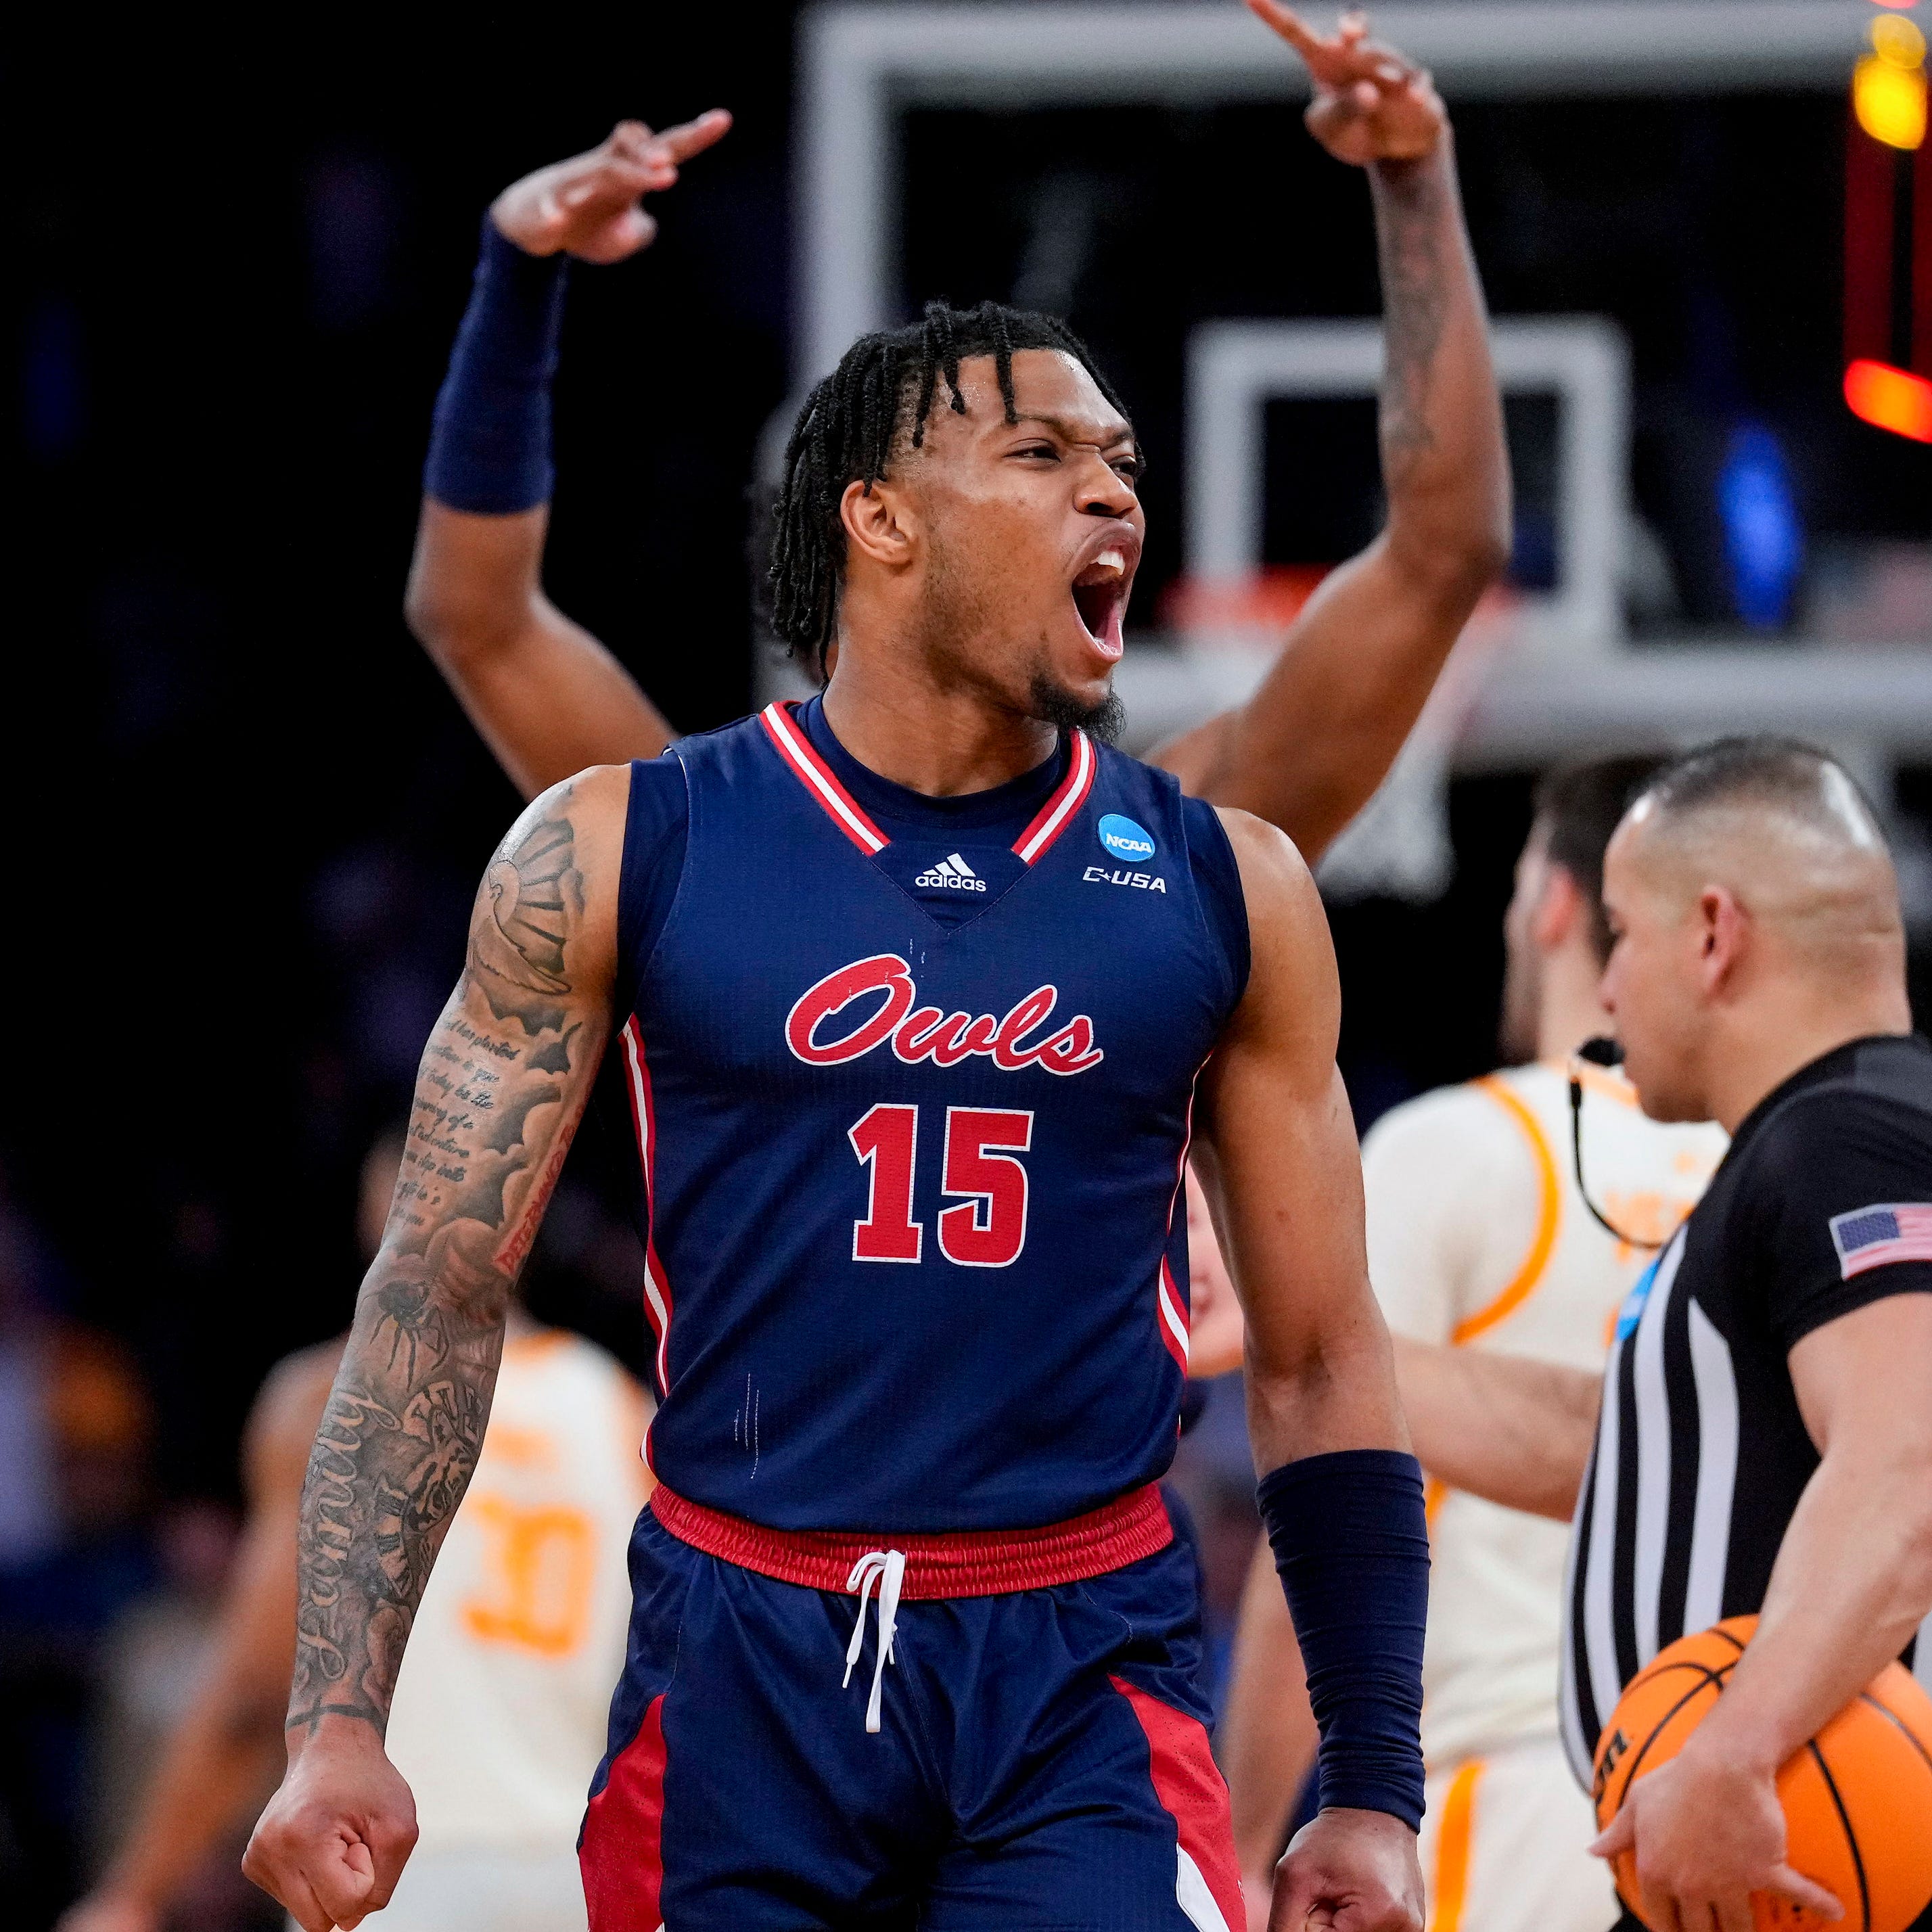 Florida Atlantic guard Alijah Martin (15) celebrates after the Owls defeated Tennessee in the Sweet 16 of the NCAA men's tournament at Madison Square Garden.